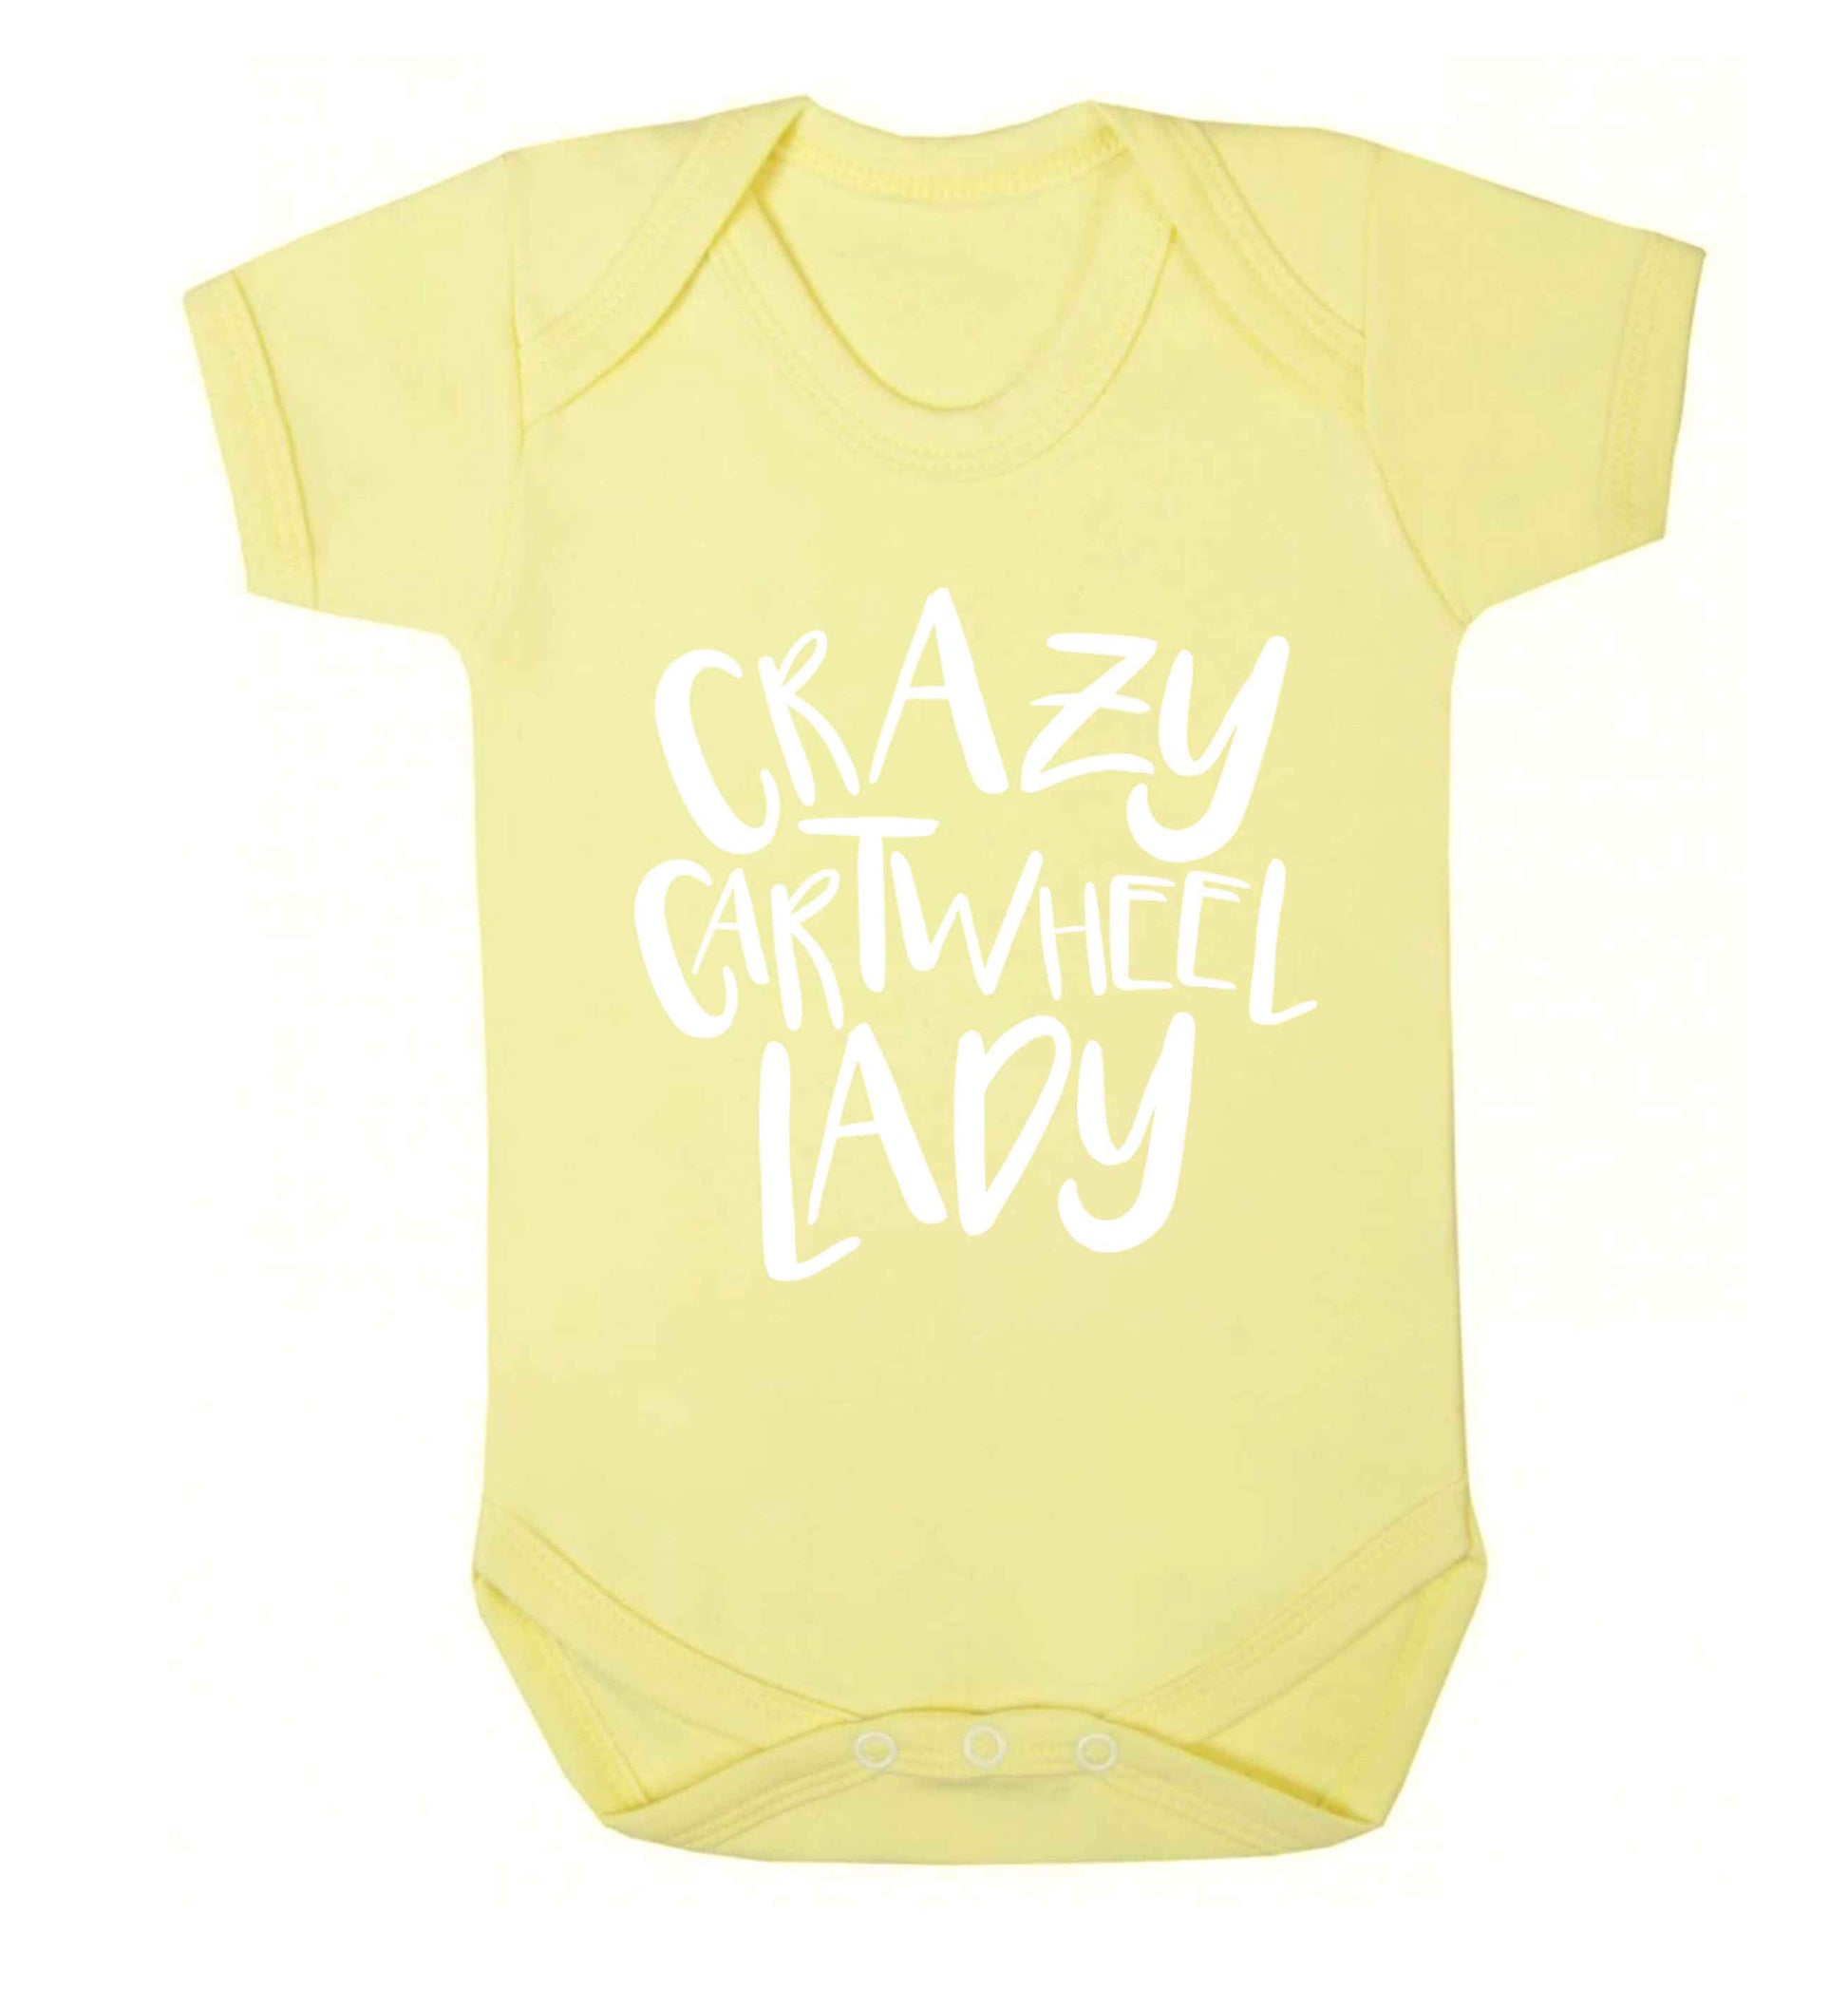 Crazy cartwheel lady Baby Vest pale yellow 18-24 months